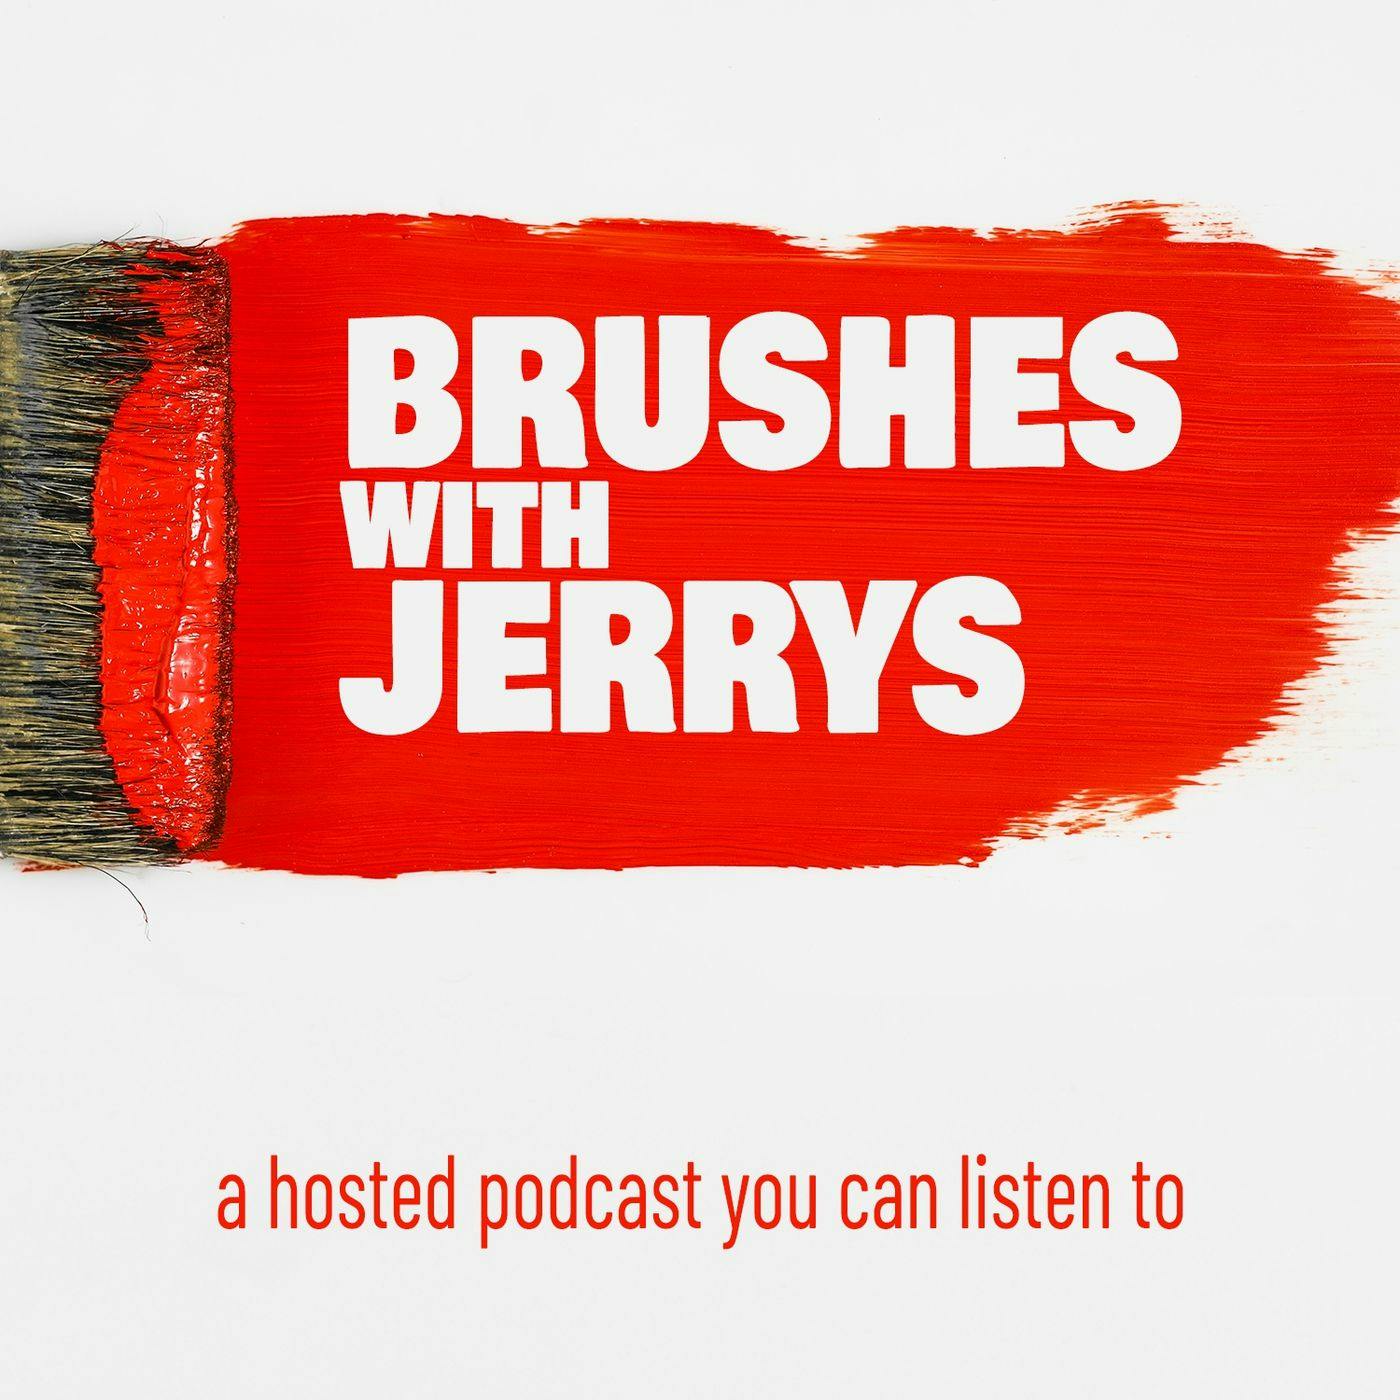 This is episode 7 of Brushes with Jerrys